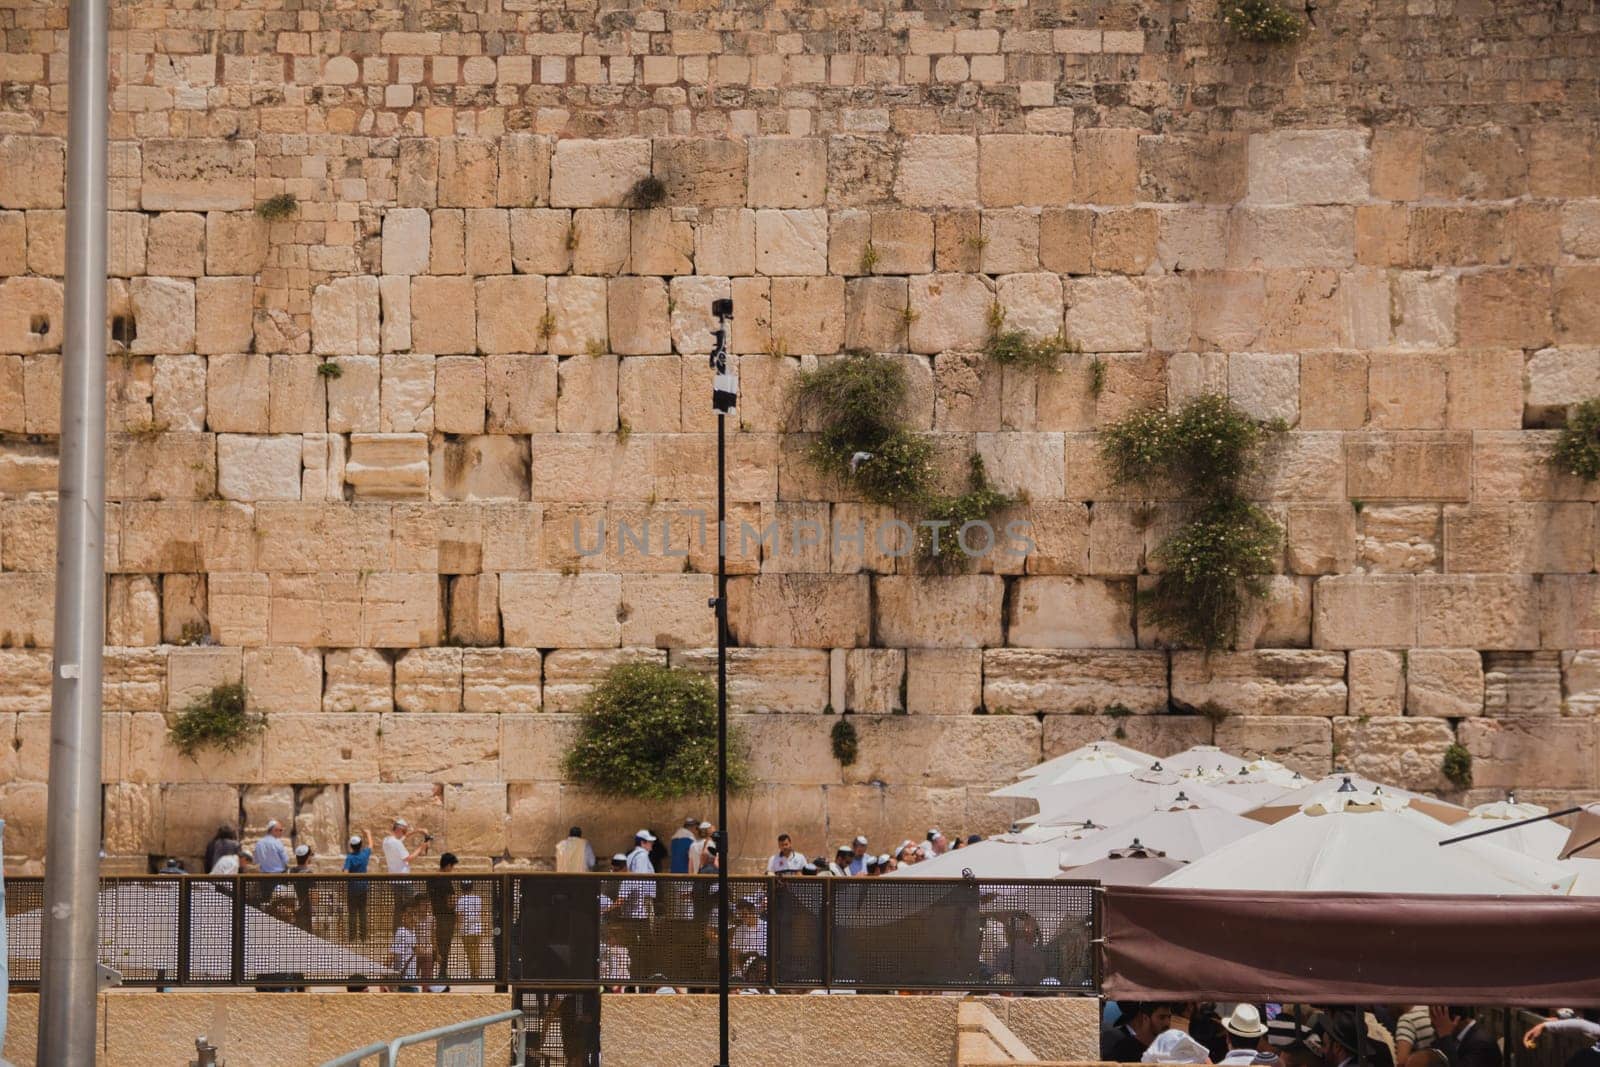 360 degrees video cameras system in filmed production at the Western Wall in the old city of Jerusalem Israel by wavemovies